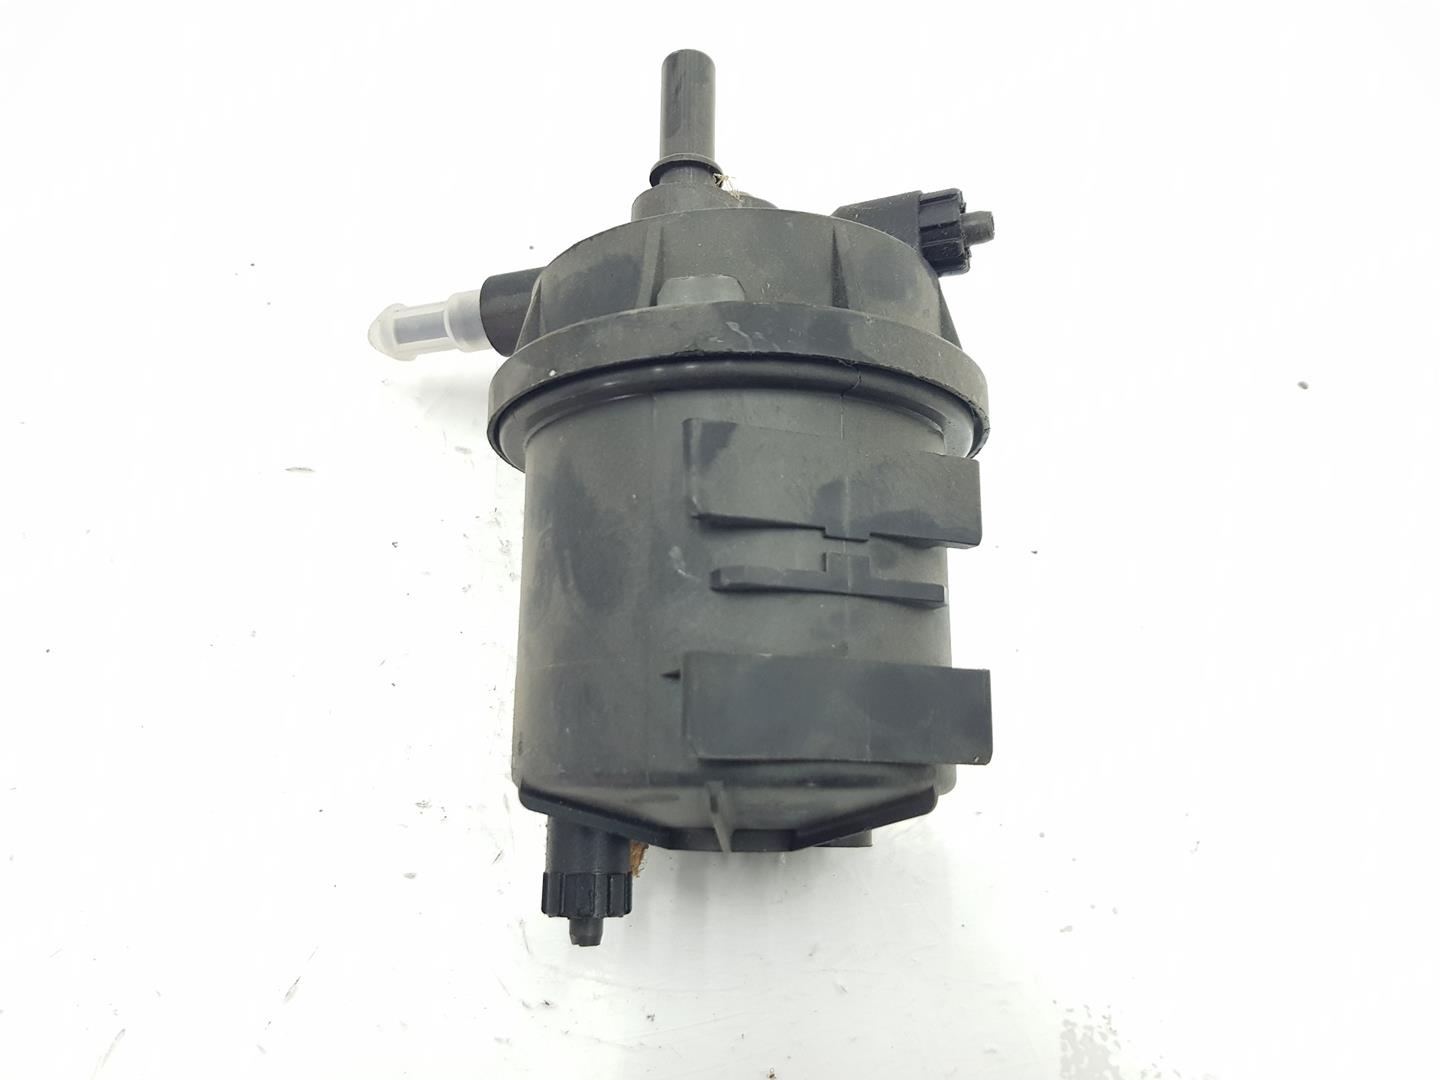 RENAULT Kangoo 1 generation (1998-2009) Other Engine Compartment Parts 7700116169, 6610964161 19808601